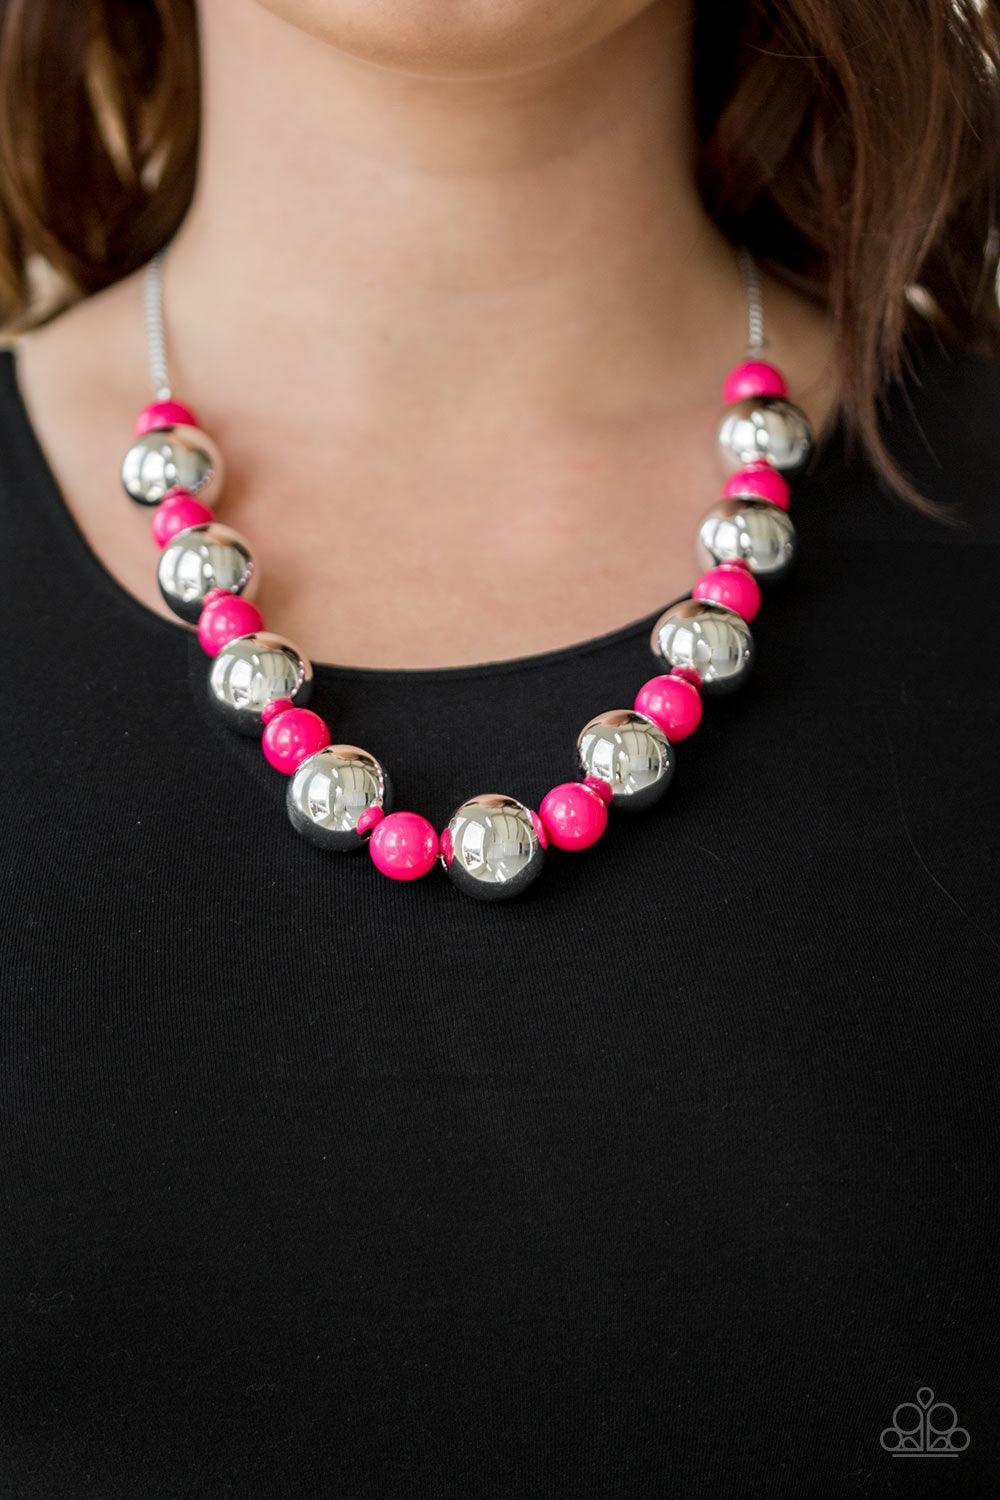 Paparazzi Accessories Top Pop - Pink Polished pink beads and dramatic silver beads drape below the collar for a perfect pop of color. Features an adjustable clasp closure. Jewelry